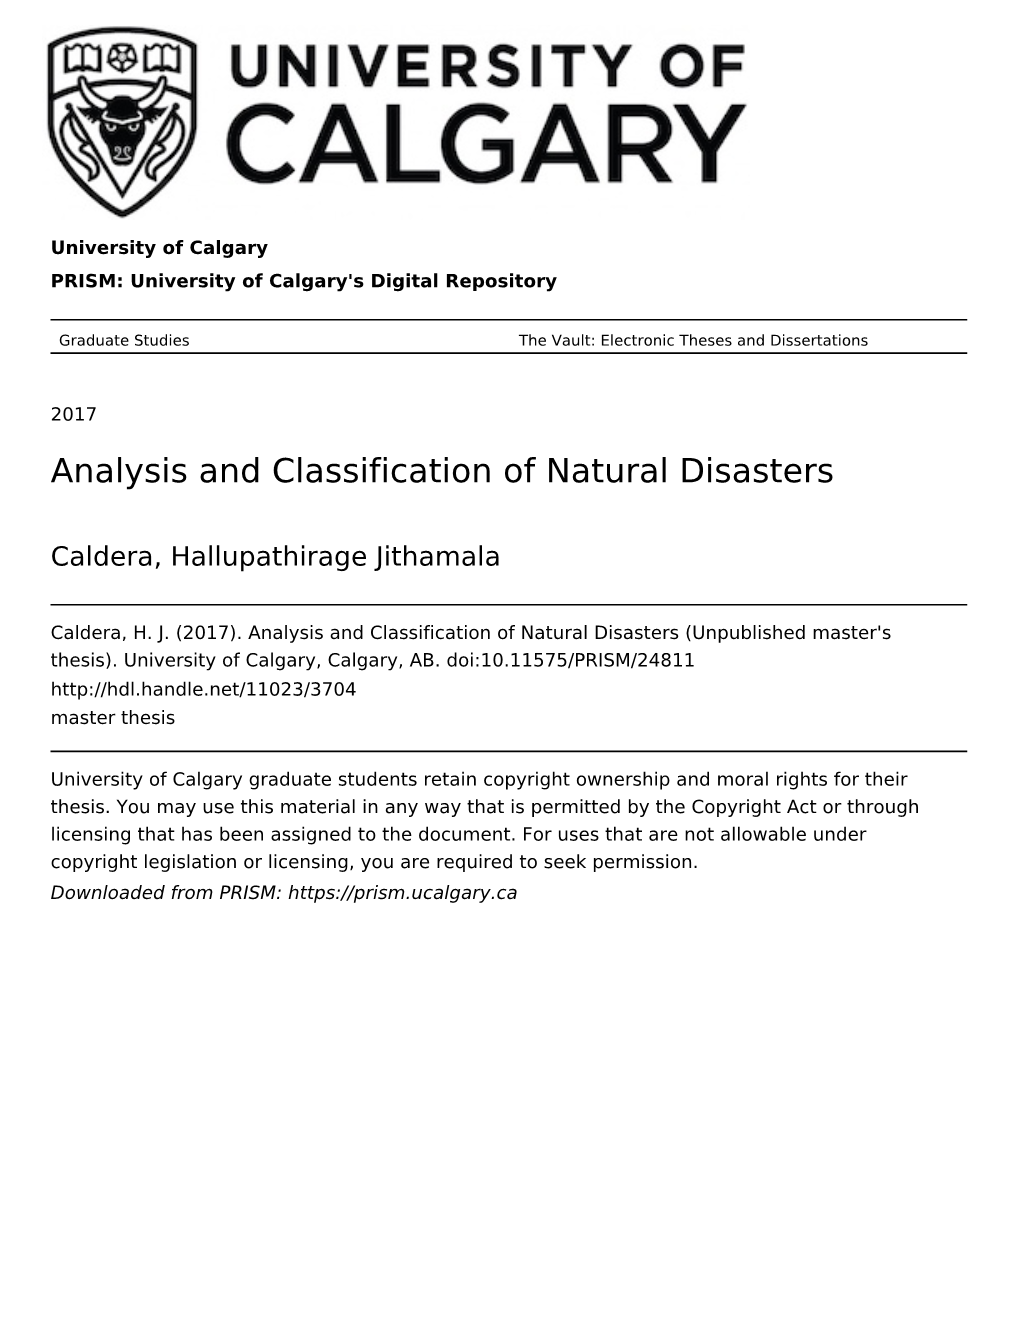 Analysis and Classification of Natural Disasters